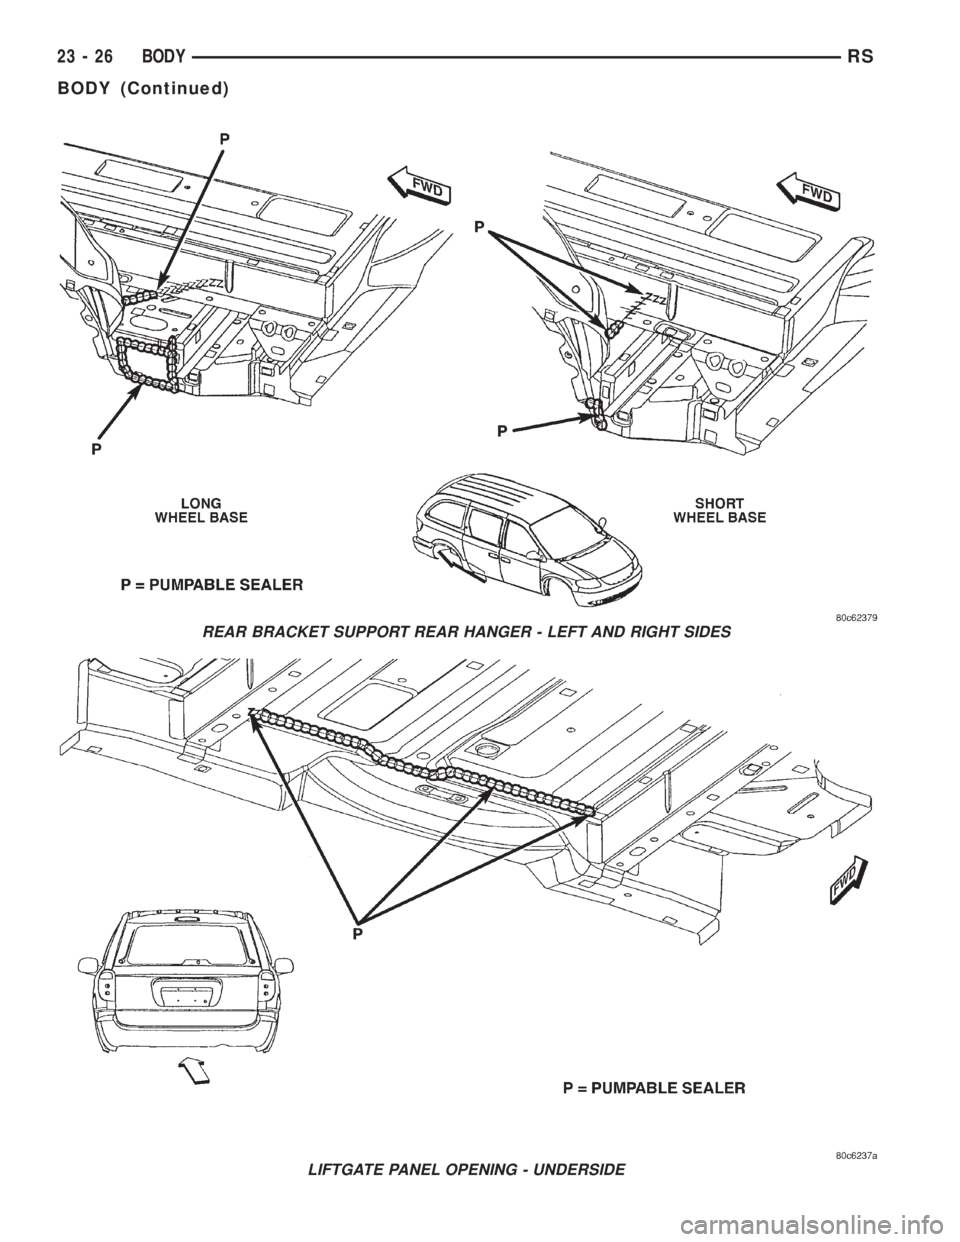 CHRYSLER VOYAGER 2001  Service Manual REAR BRACKET SUPPORT REAR HANGER - LEFT AND RIGHT SIDES
LIFTGATE PANEL OPENING - UNDERSIDE
23 - 26 BODYRS
BODY (Continued) 